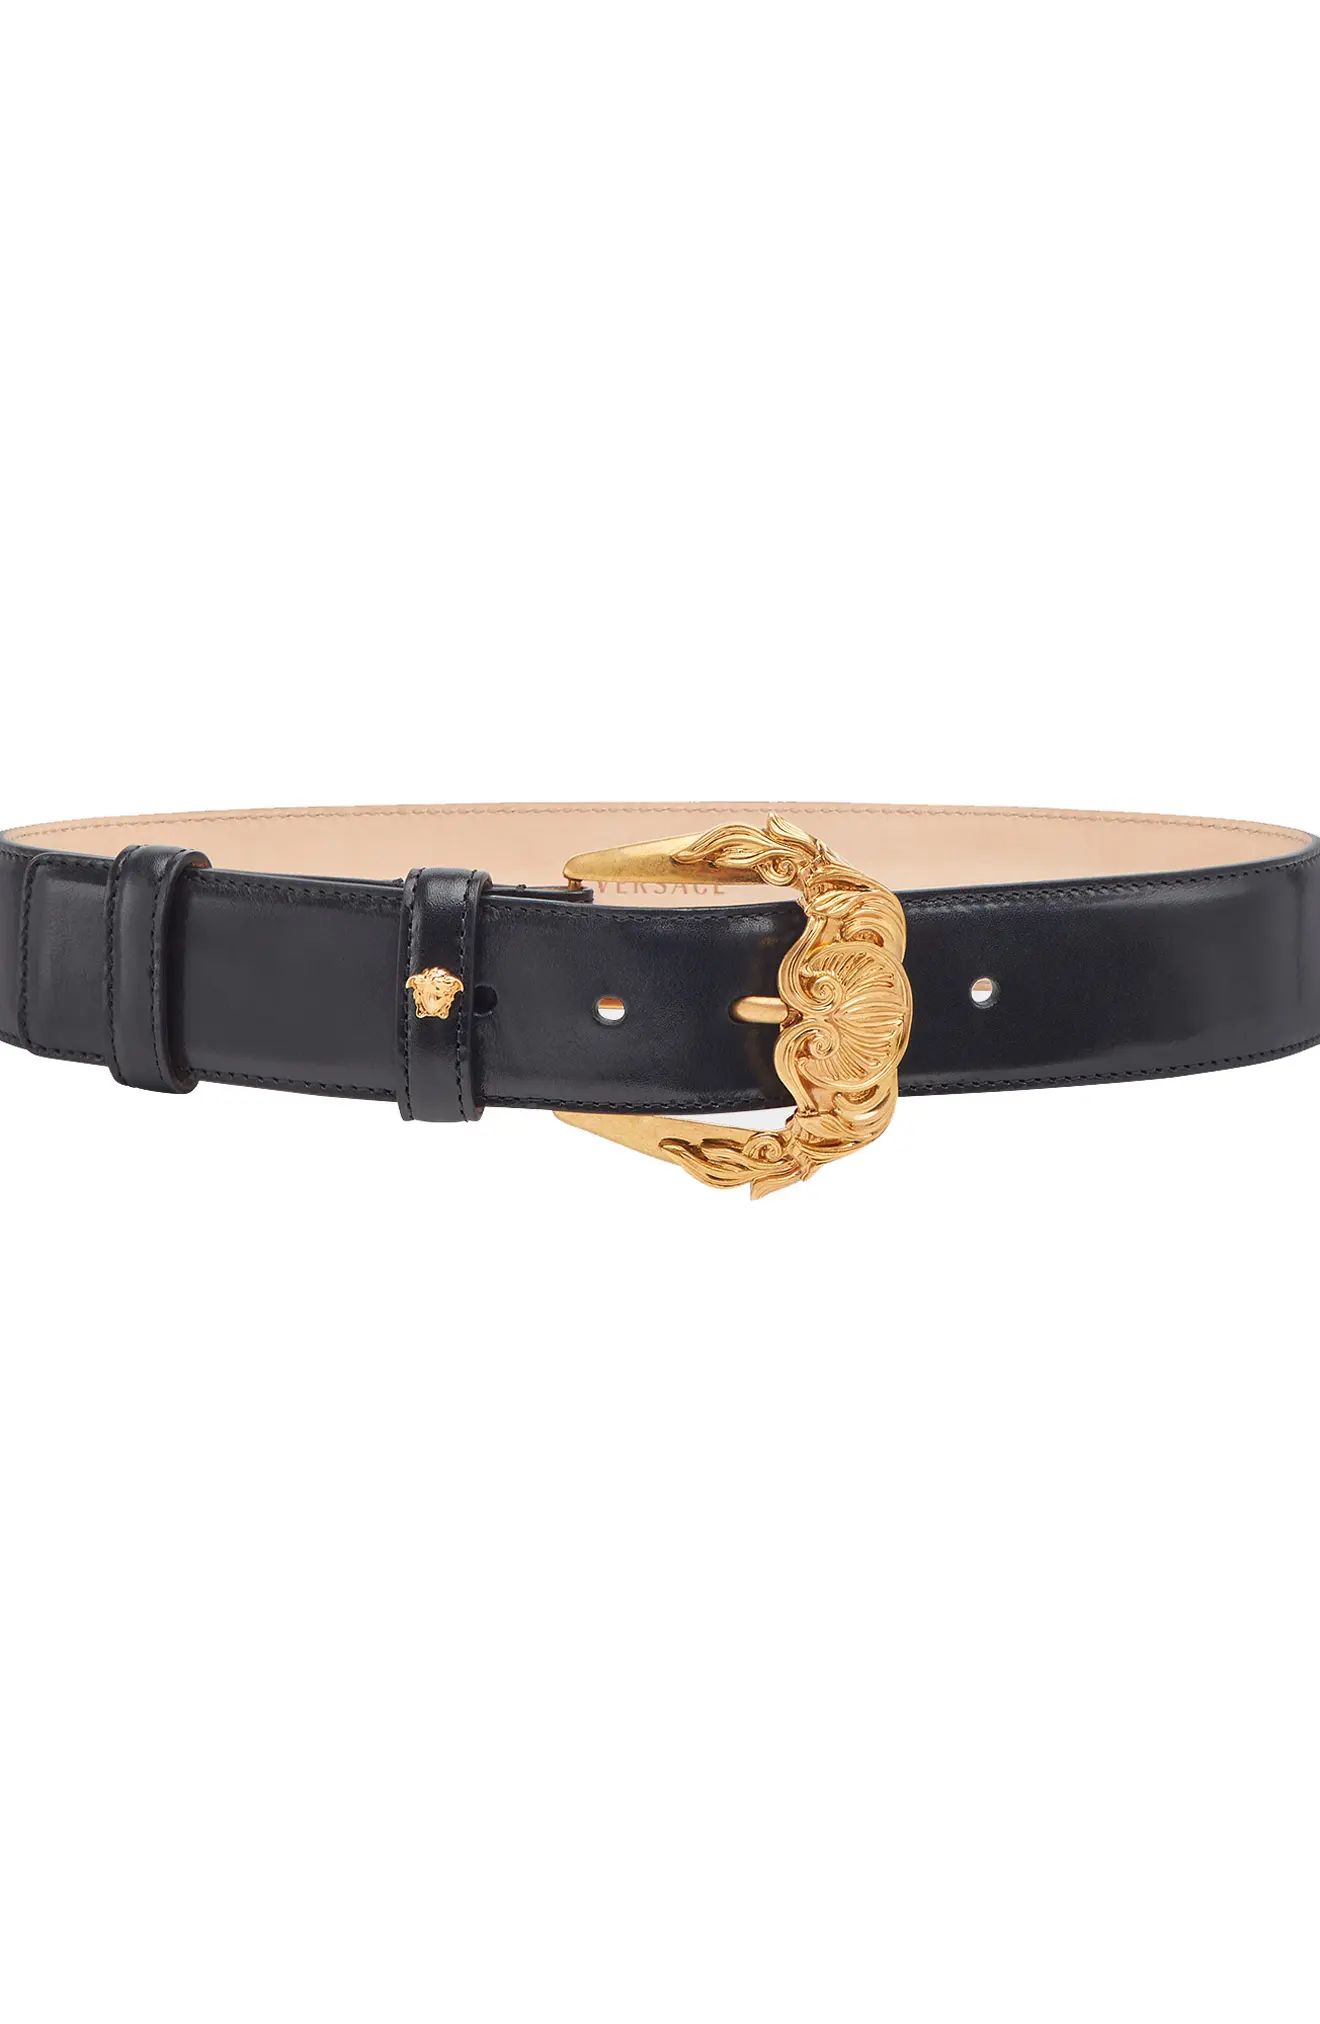 Women's Versace First Line Baroque Buckle Leather Belt, Size 80 - Nero/ Gold Tribute | Nordstrom